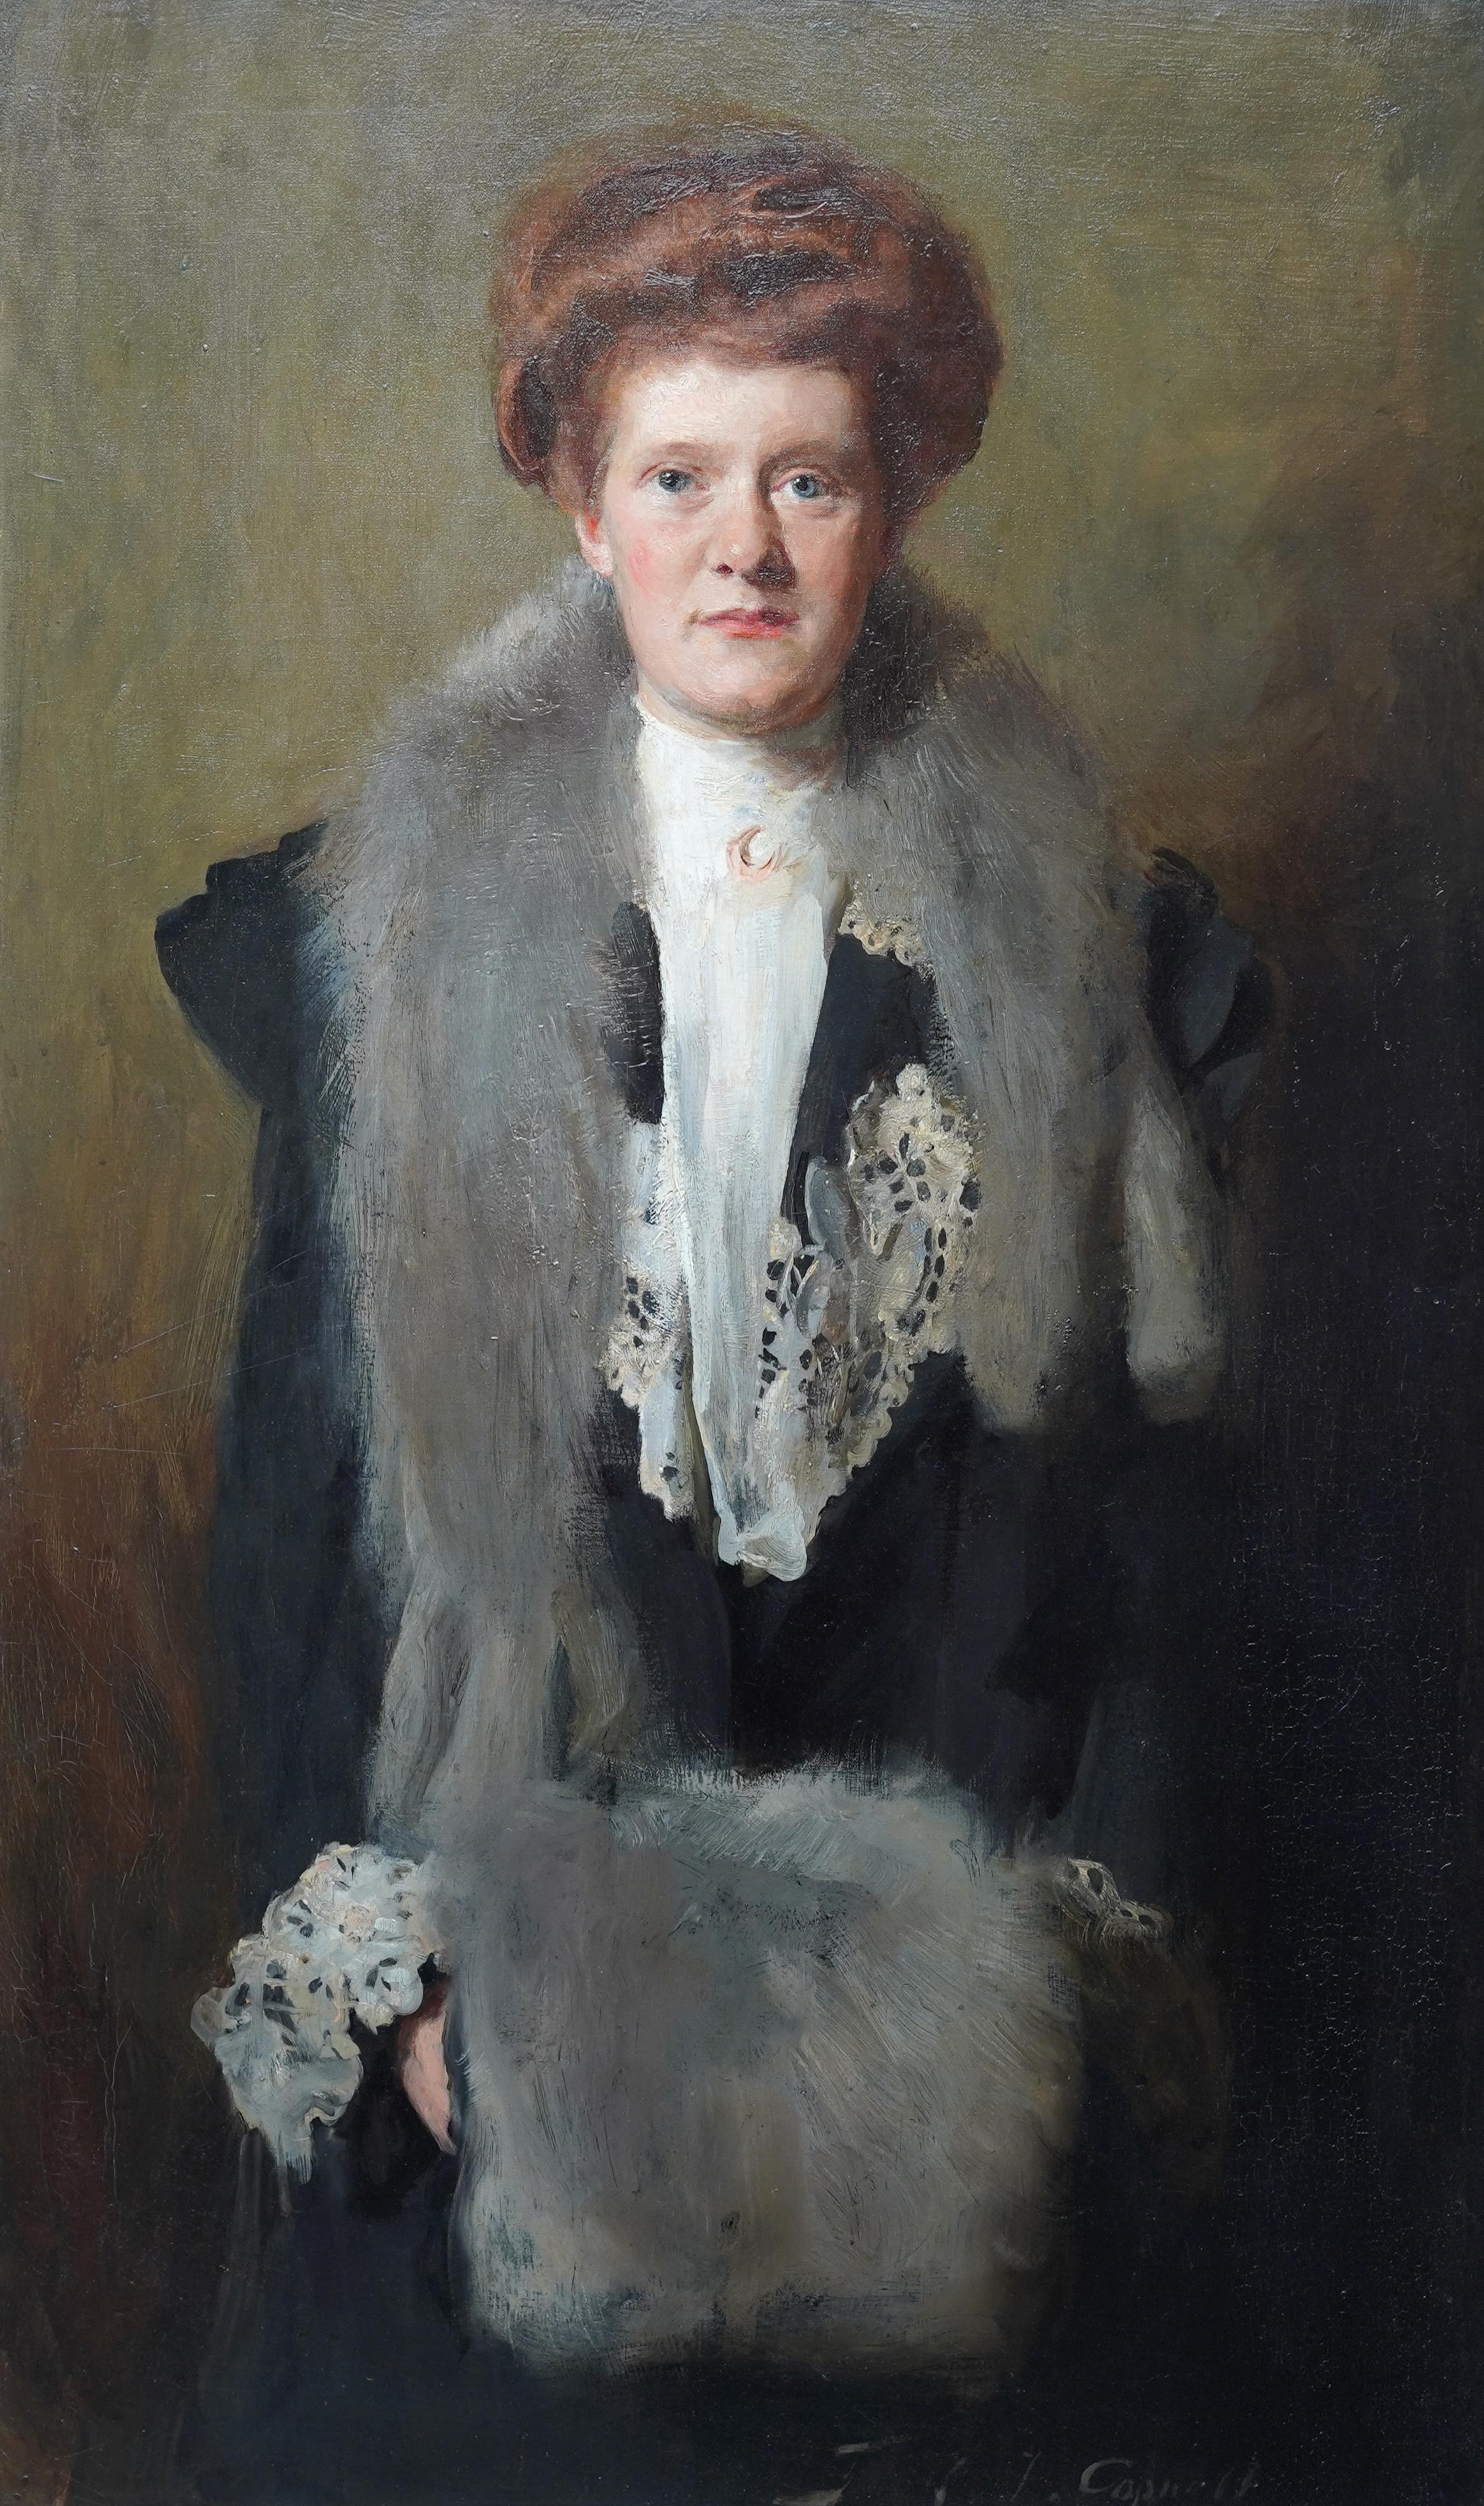 Portrait of a Lady in Stole and Muff - British Edwardian art oil painting - Painting by Frank Thomas Copnall